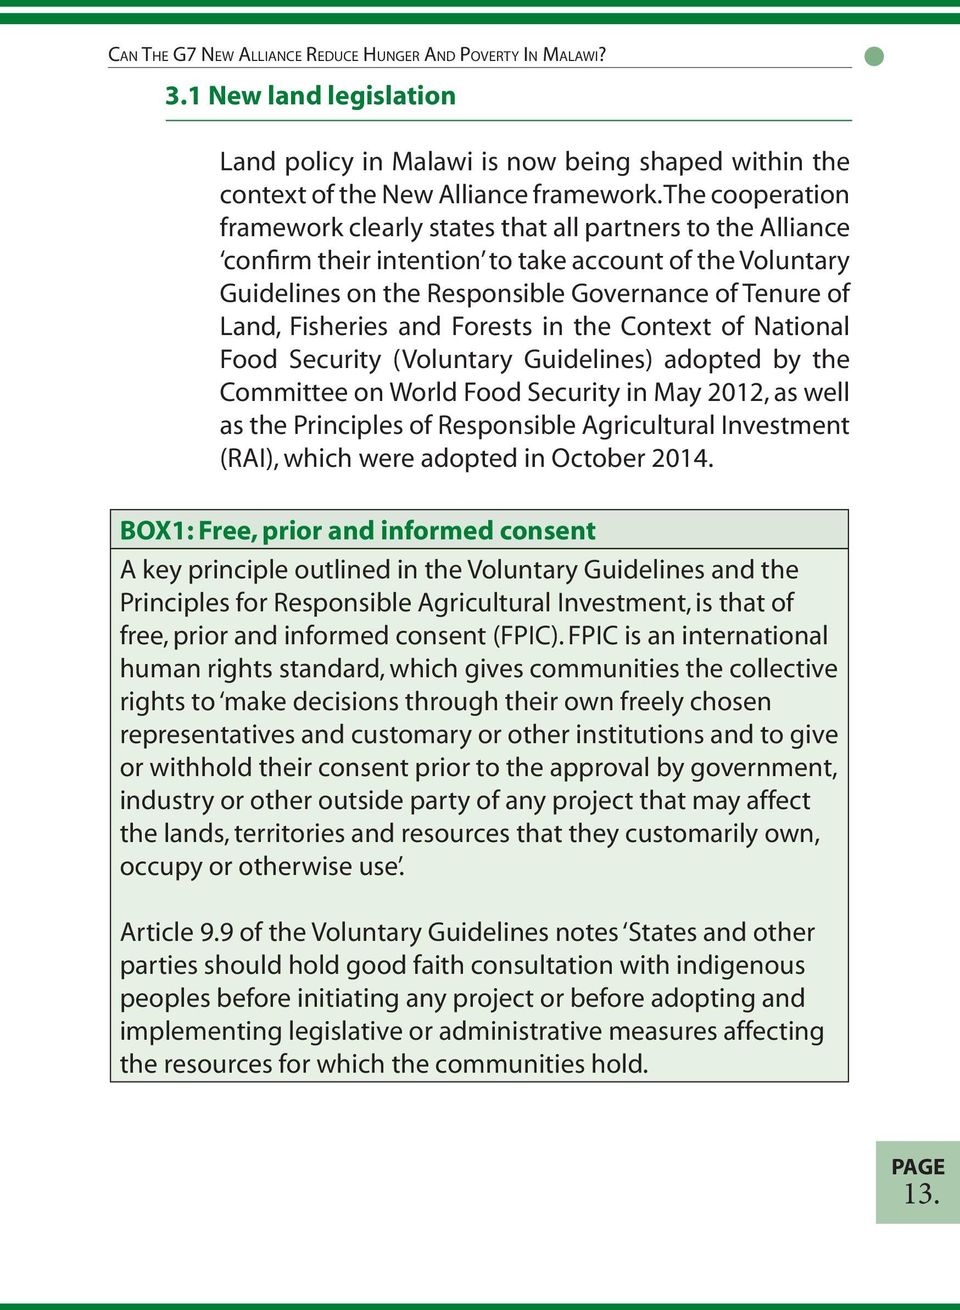 Fisheries and Forests in the Context of National Food Security (Voluntary Guidelines) adopted by the Committee on World Food Security in May 2012, as well as the Principles of Responsible